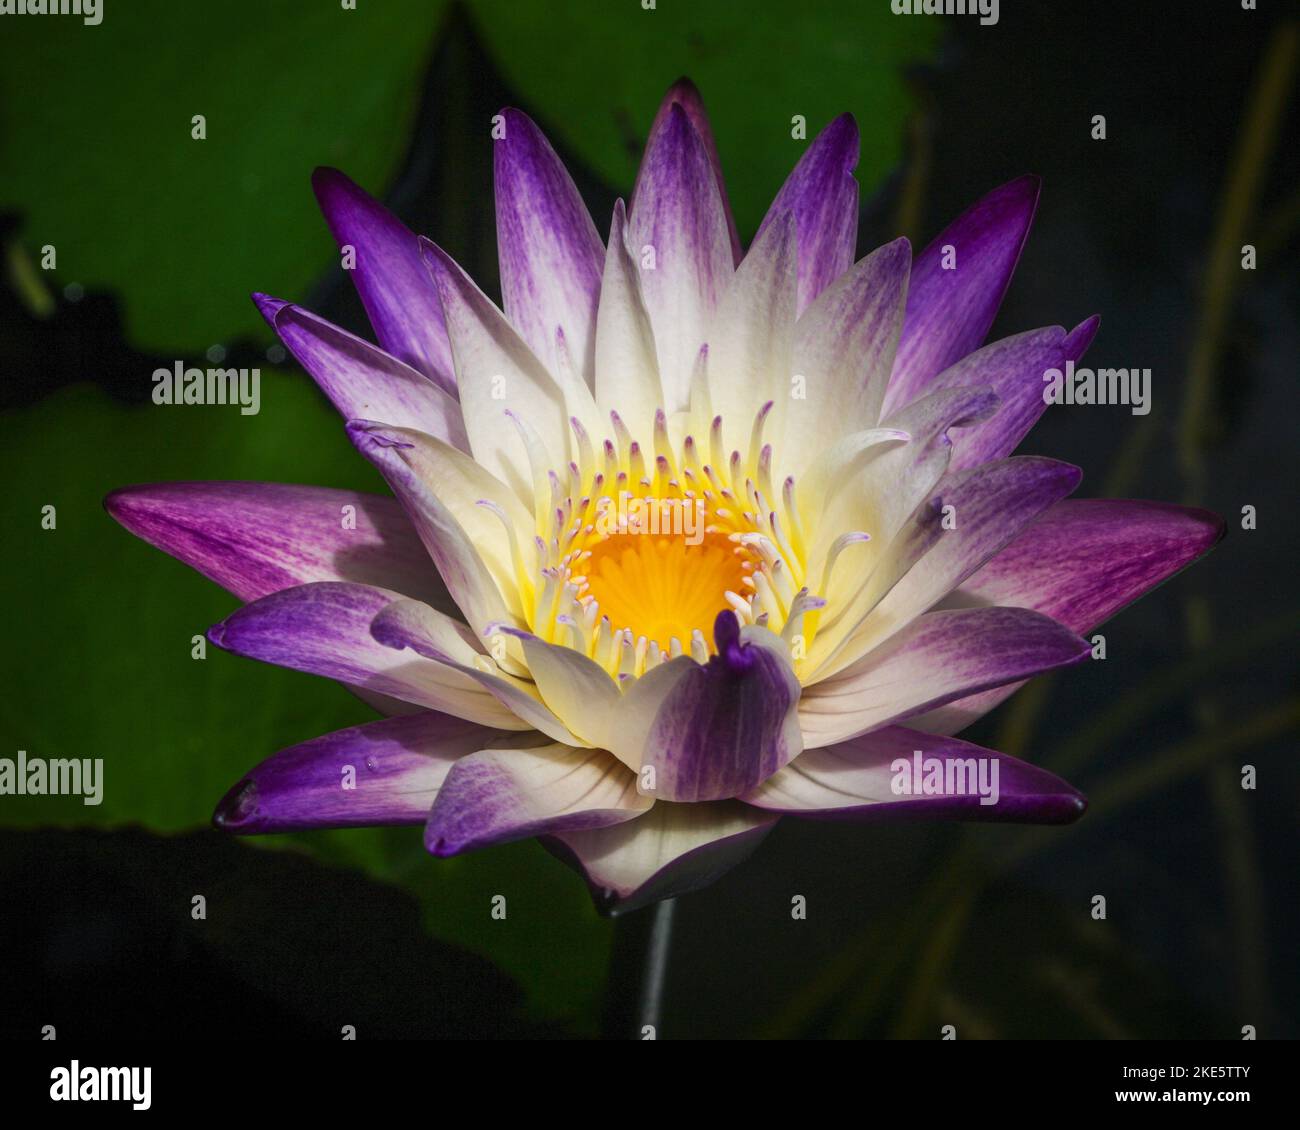 Closeup view of bright purple and white water lily 'purple joy' flower blooming outdoors on dark natural background Stock Photo